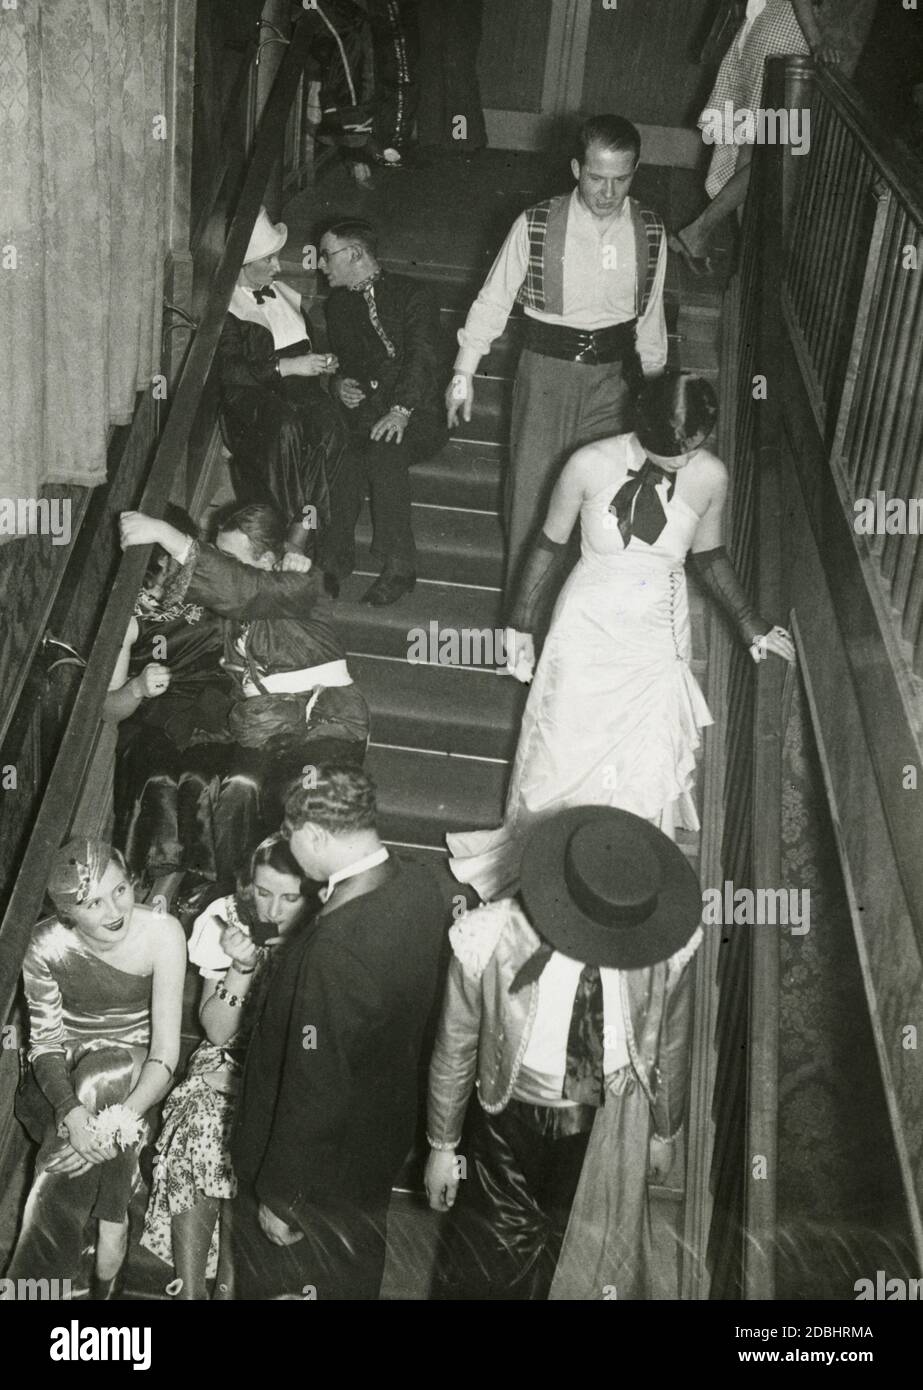 'On February 10, 1933, the Verein fuer Deutsches Kunstgewerbe in Berlin organized an artist's masquerade ball called ''Die bunte Laterne'' in the  Festraeumen des Zoo. The photograph shows couples sitting on a staircase.' Stock Photo